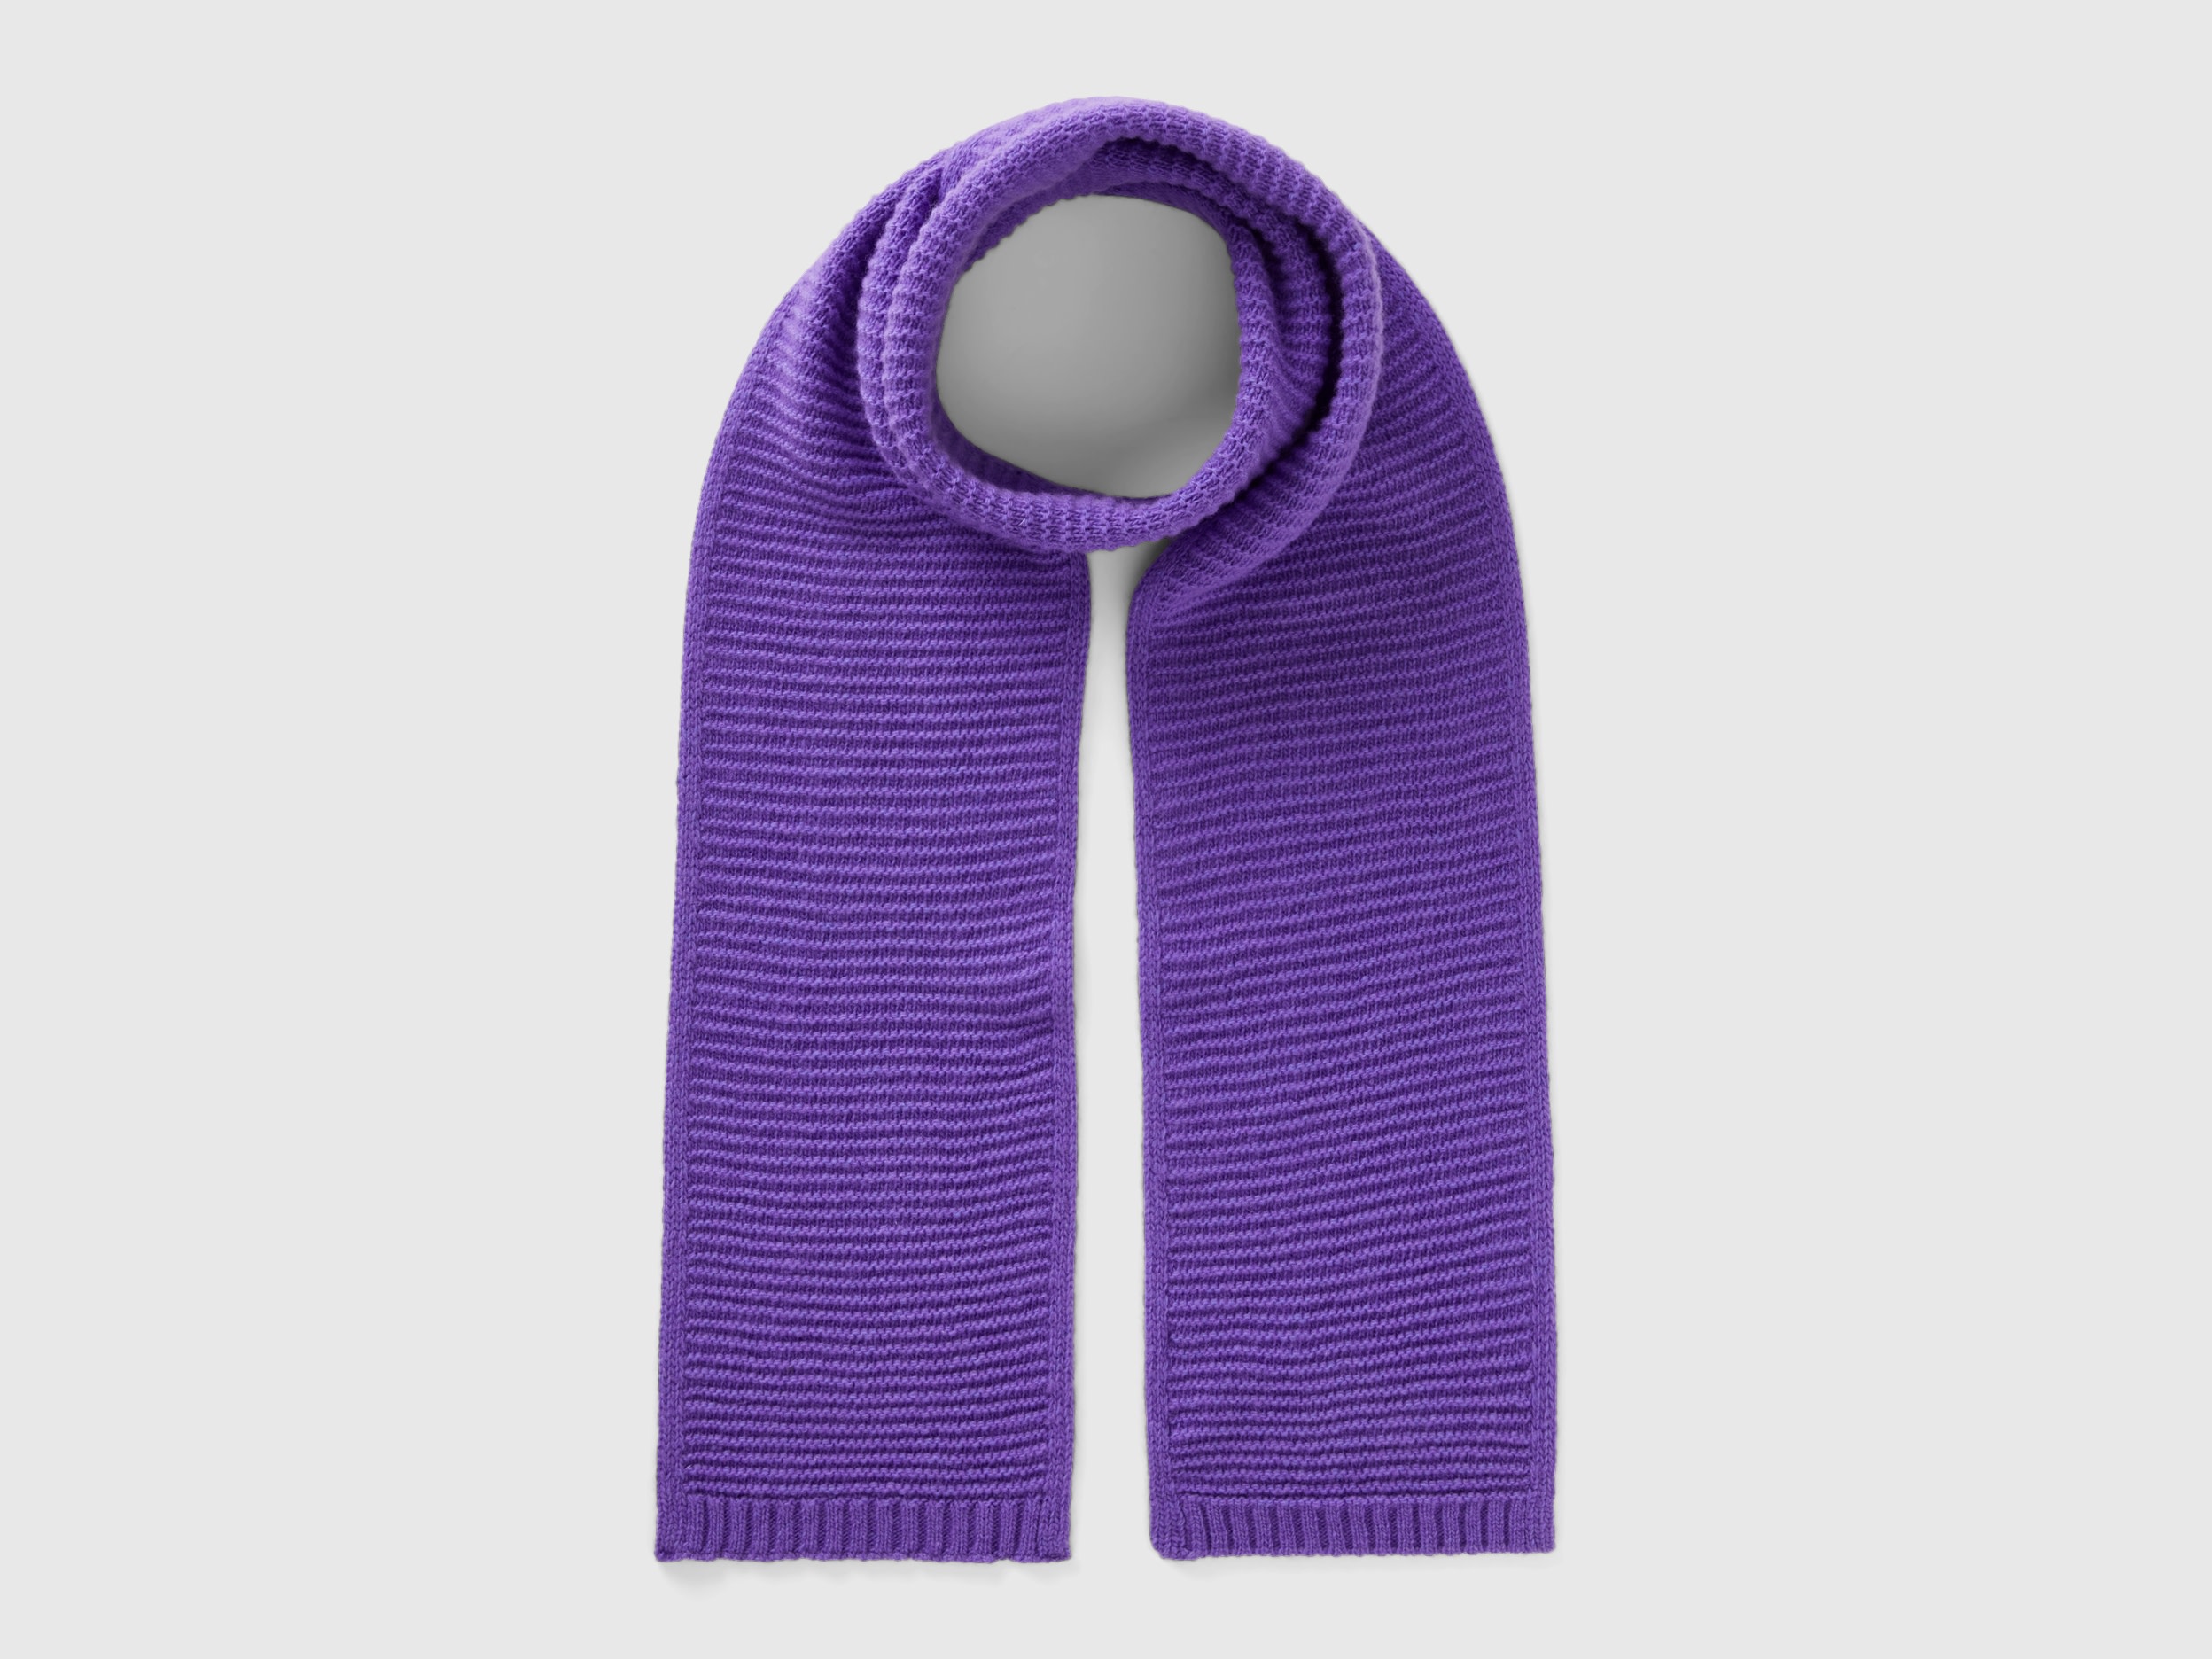 Benetton, Knit Scarf In Stretch Wool Blend, size 1-3, Violet, Kids